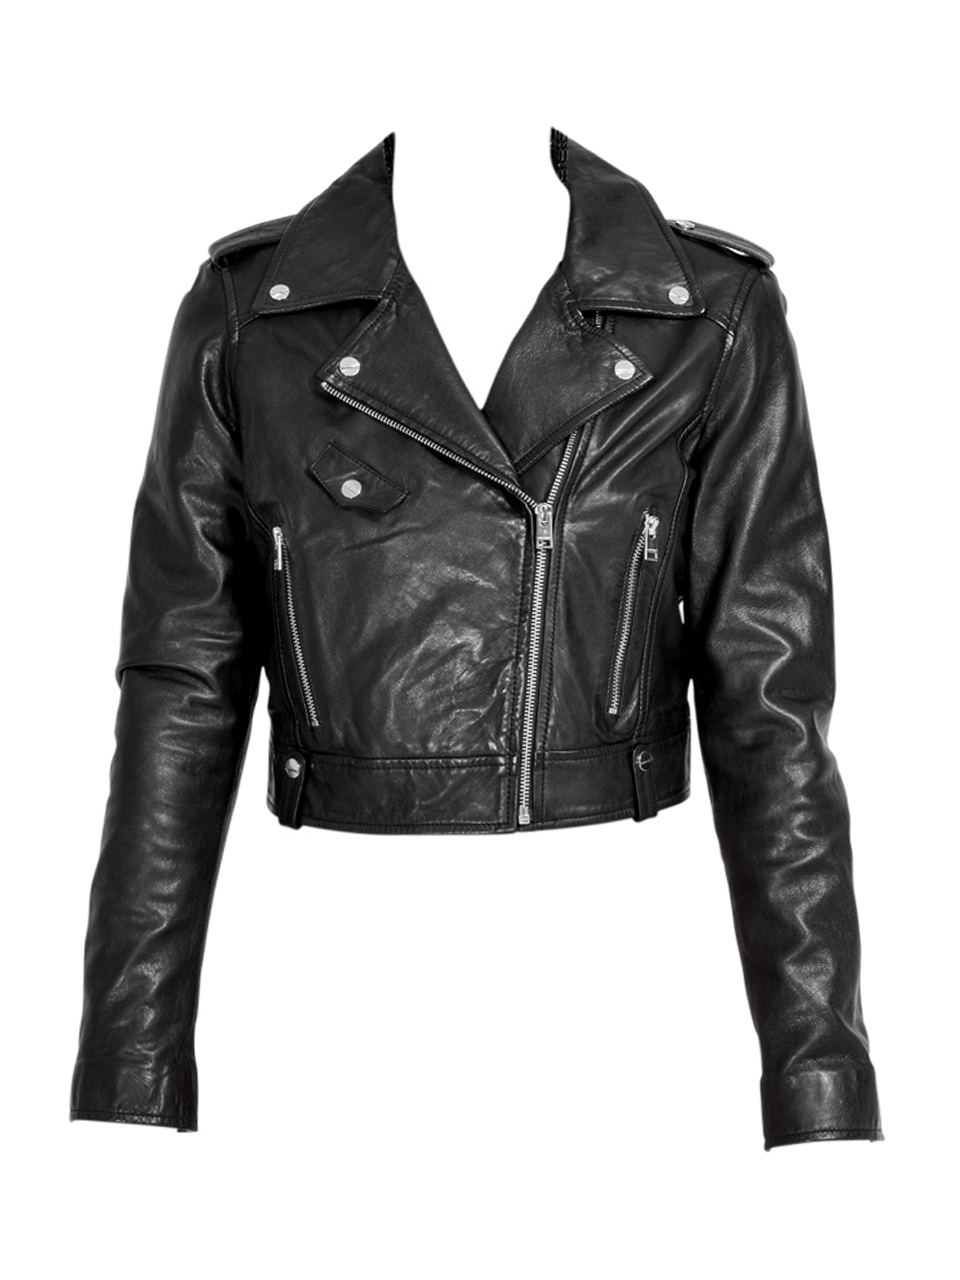 LAMARQUE Ciara Iconic Leather Jacket in Black Product Shot 